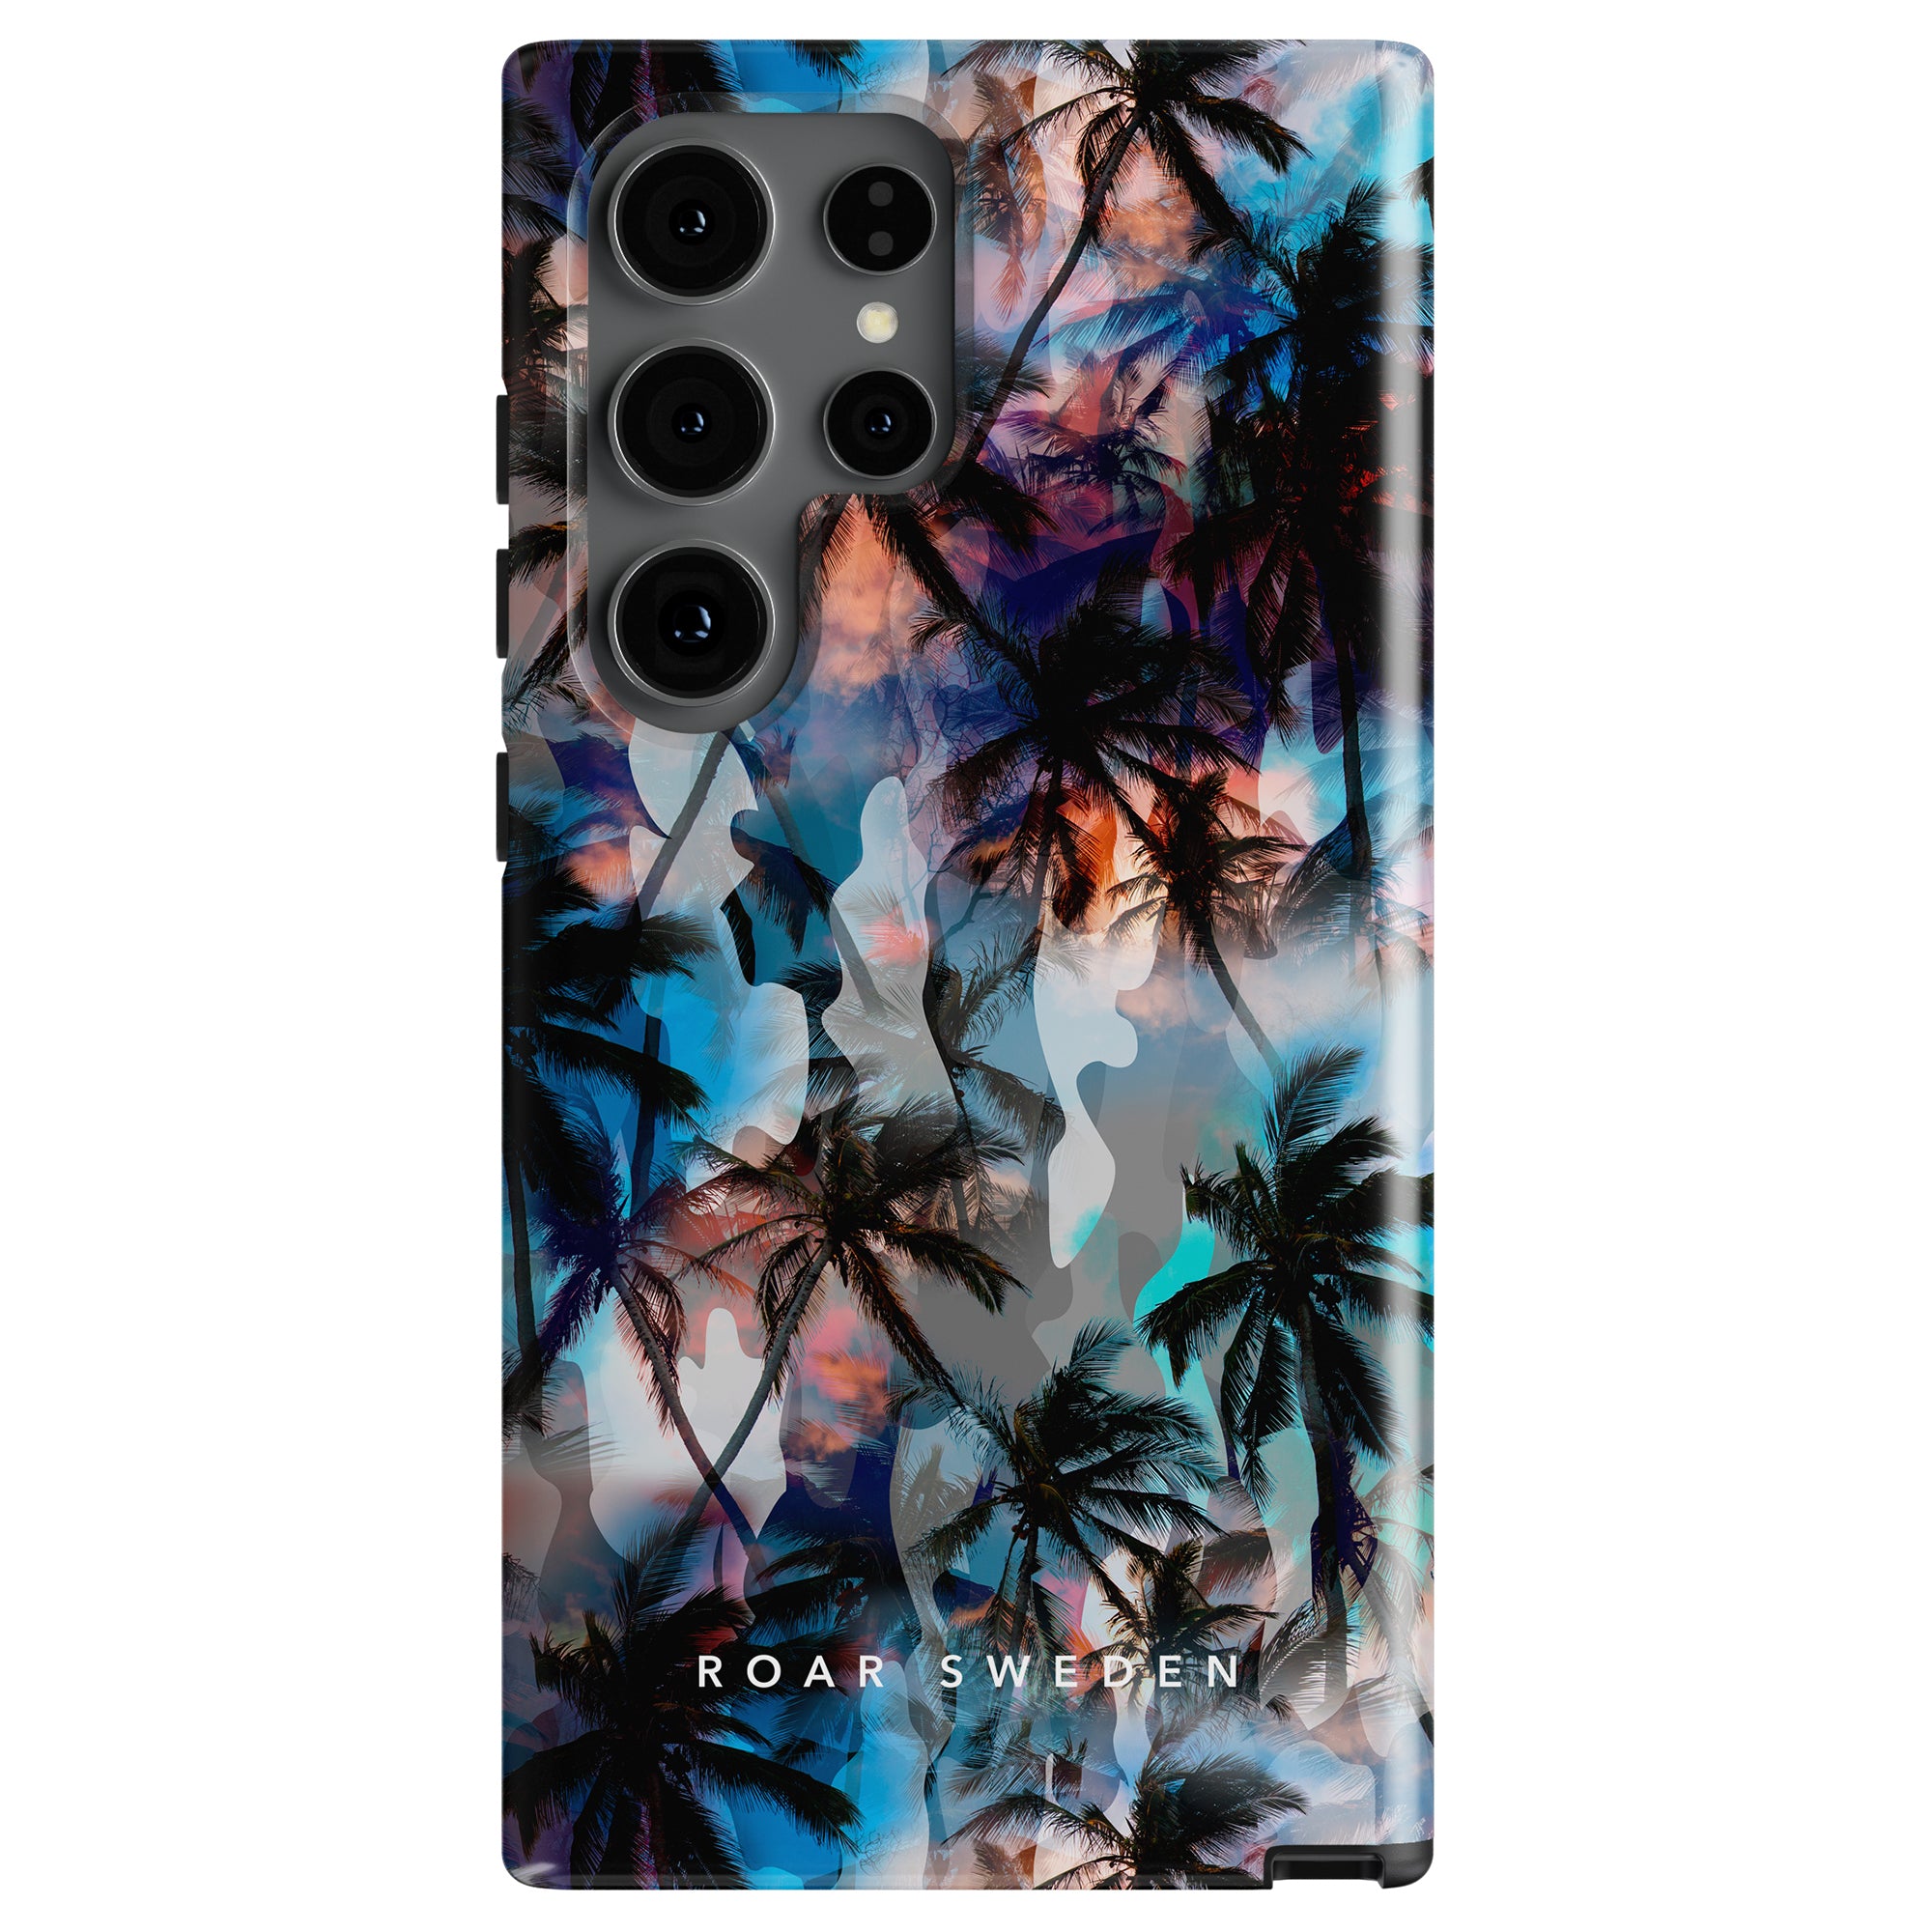 A smartphone with a clear case featuring a colorful sunset and palm tree design, reminiscent of Venice Beach. The brand logo "Roar Sweden" is at the bottom. The camera module is prominent.